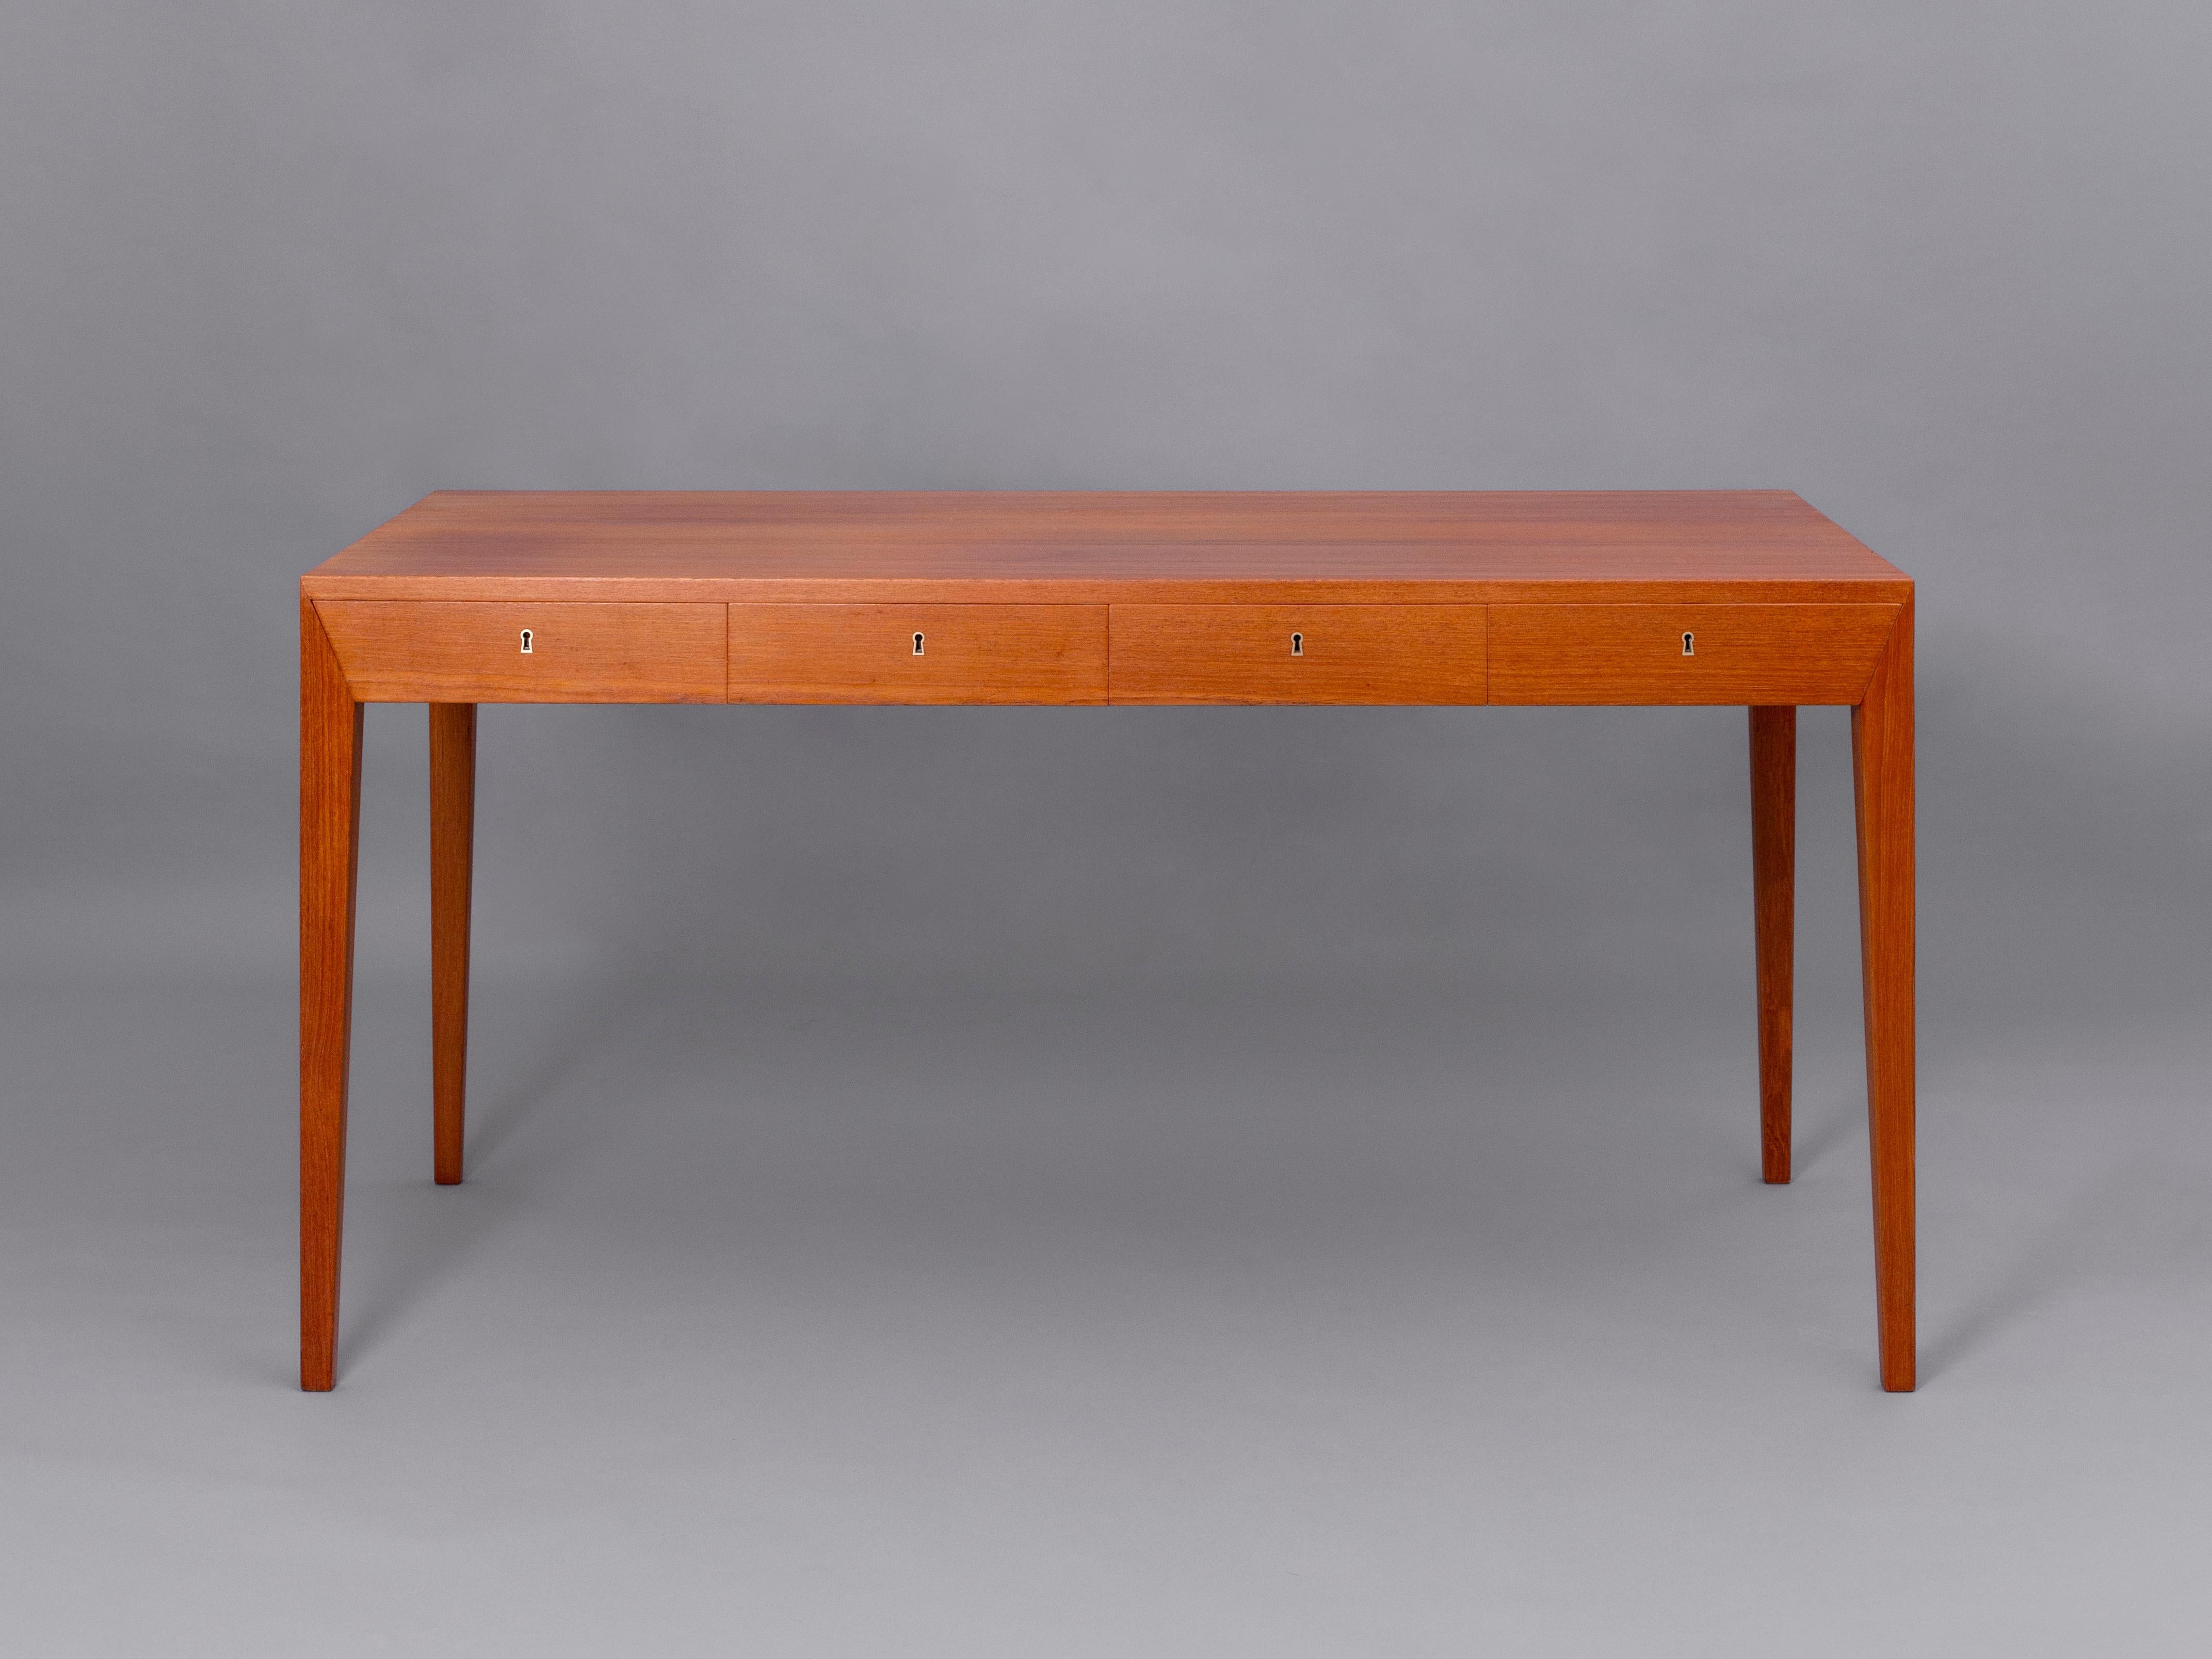 Desk designed by Severin Hansen in Teak wood for Haslev Møbelsnedkeri. Denmark, 1958

Simple and refined lines, featuring four frontal drawers with the desinger’s signature diagonal wood ensamble, the drawers are both a functional and a decorative